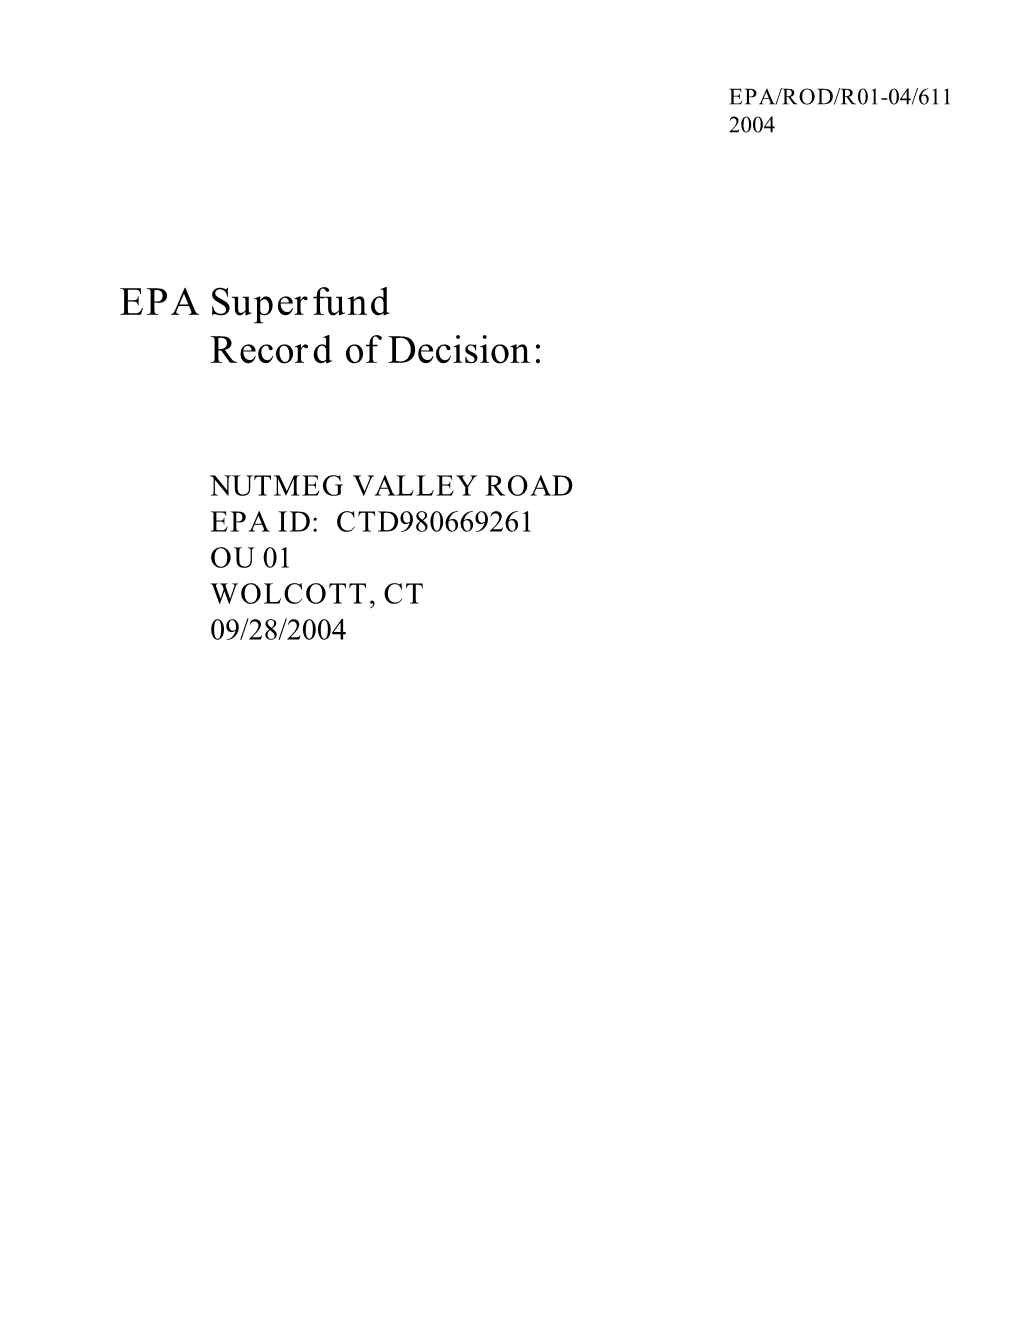 Record of Decision (Rods)